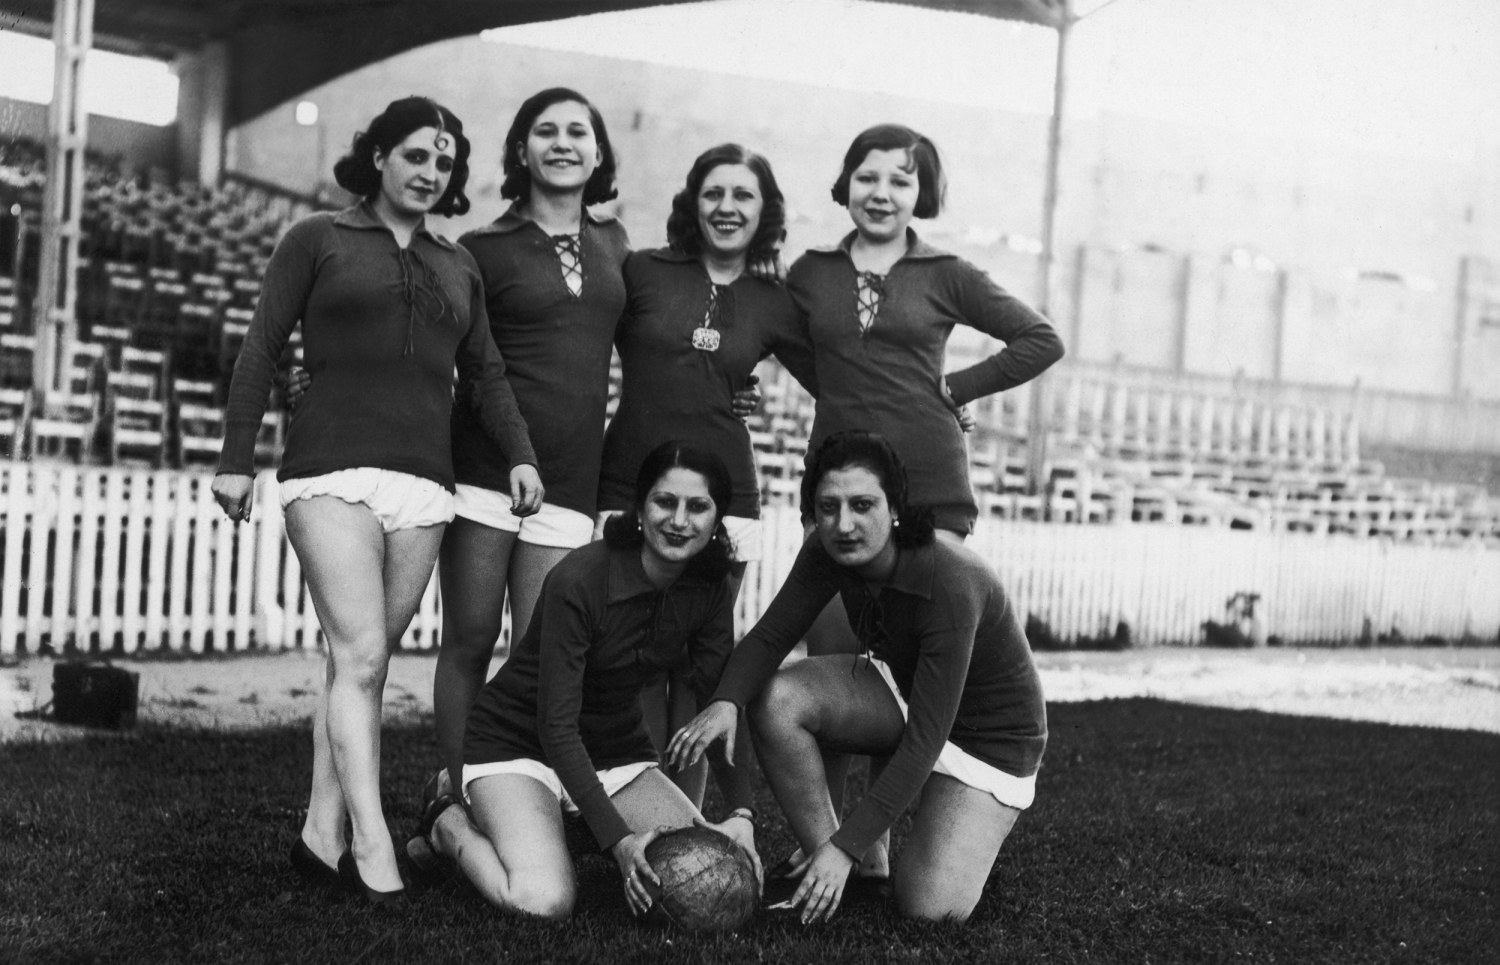 Women's fashion in sports through the years